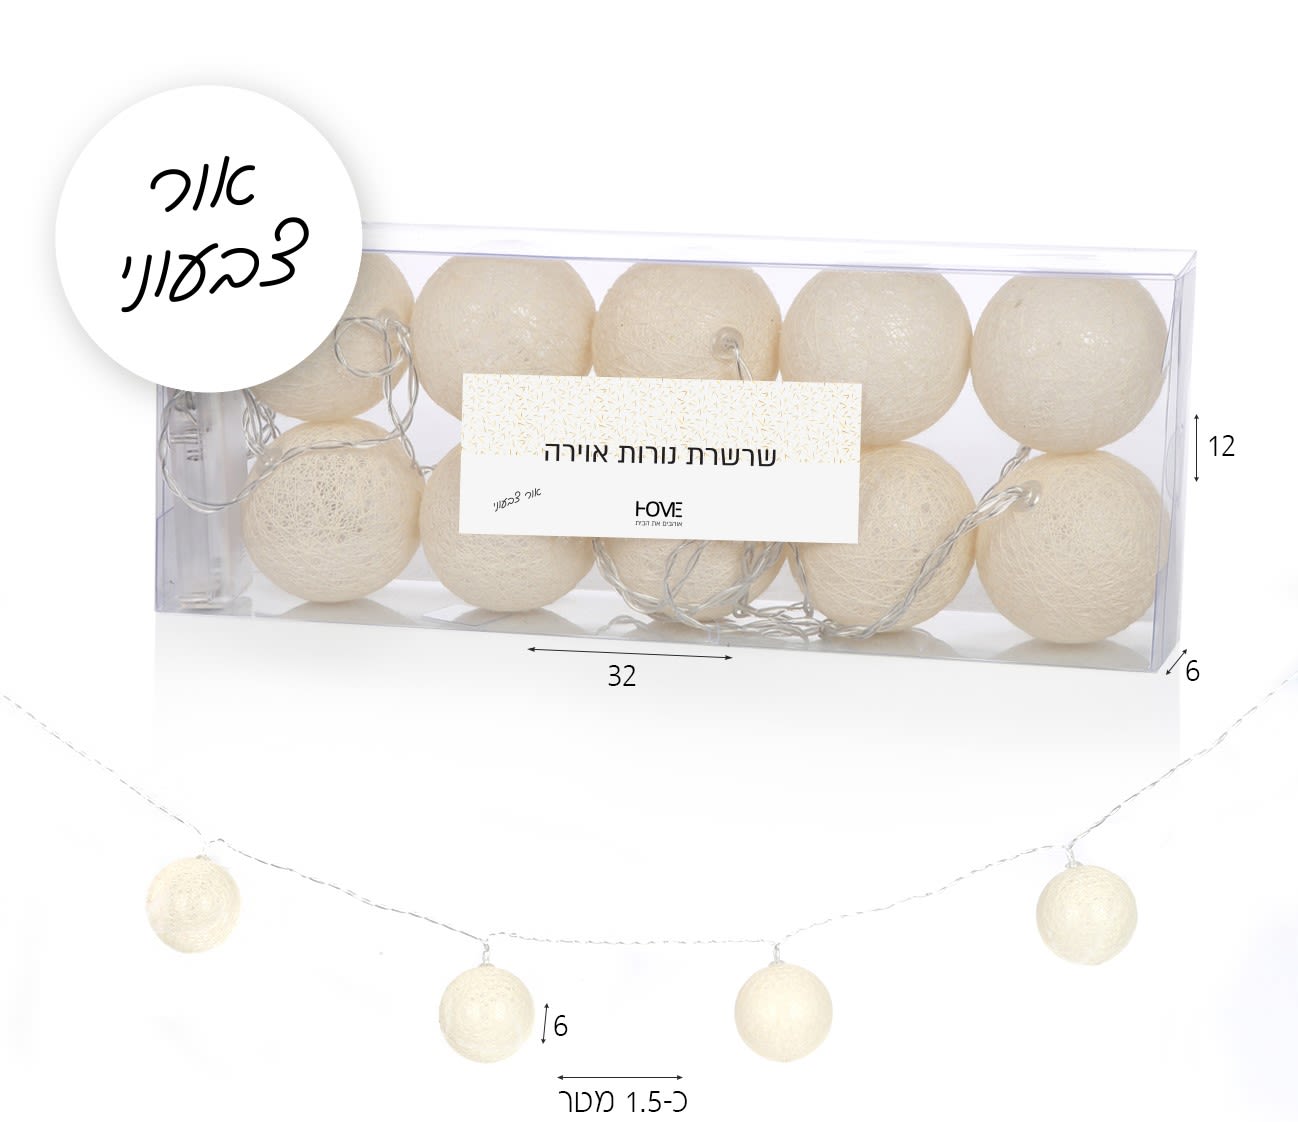 Sukkah Decorations - Chain of 10 white, linen-patterned bulbs